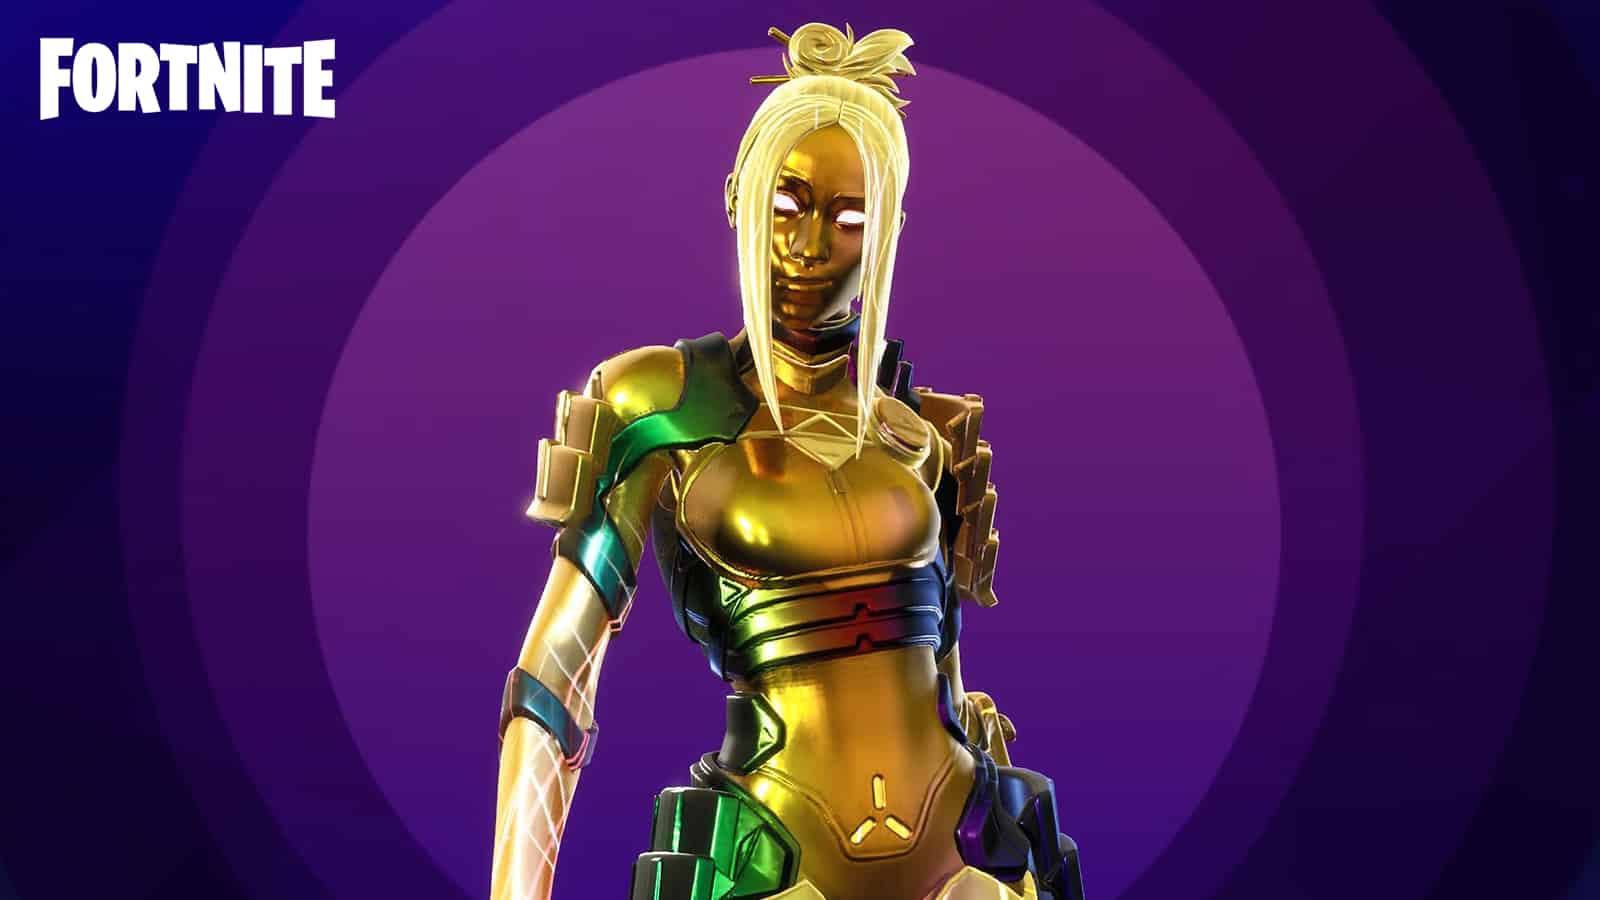 One of the Fortnite Chapter 3 Season 3 Super Styles